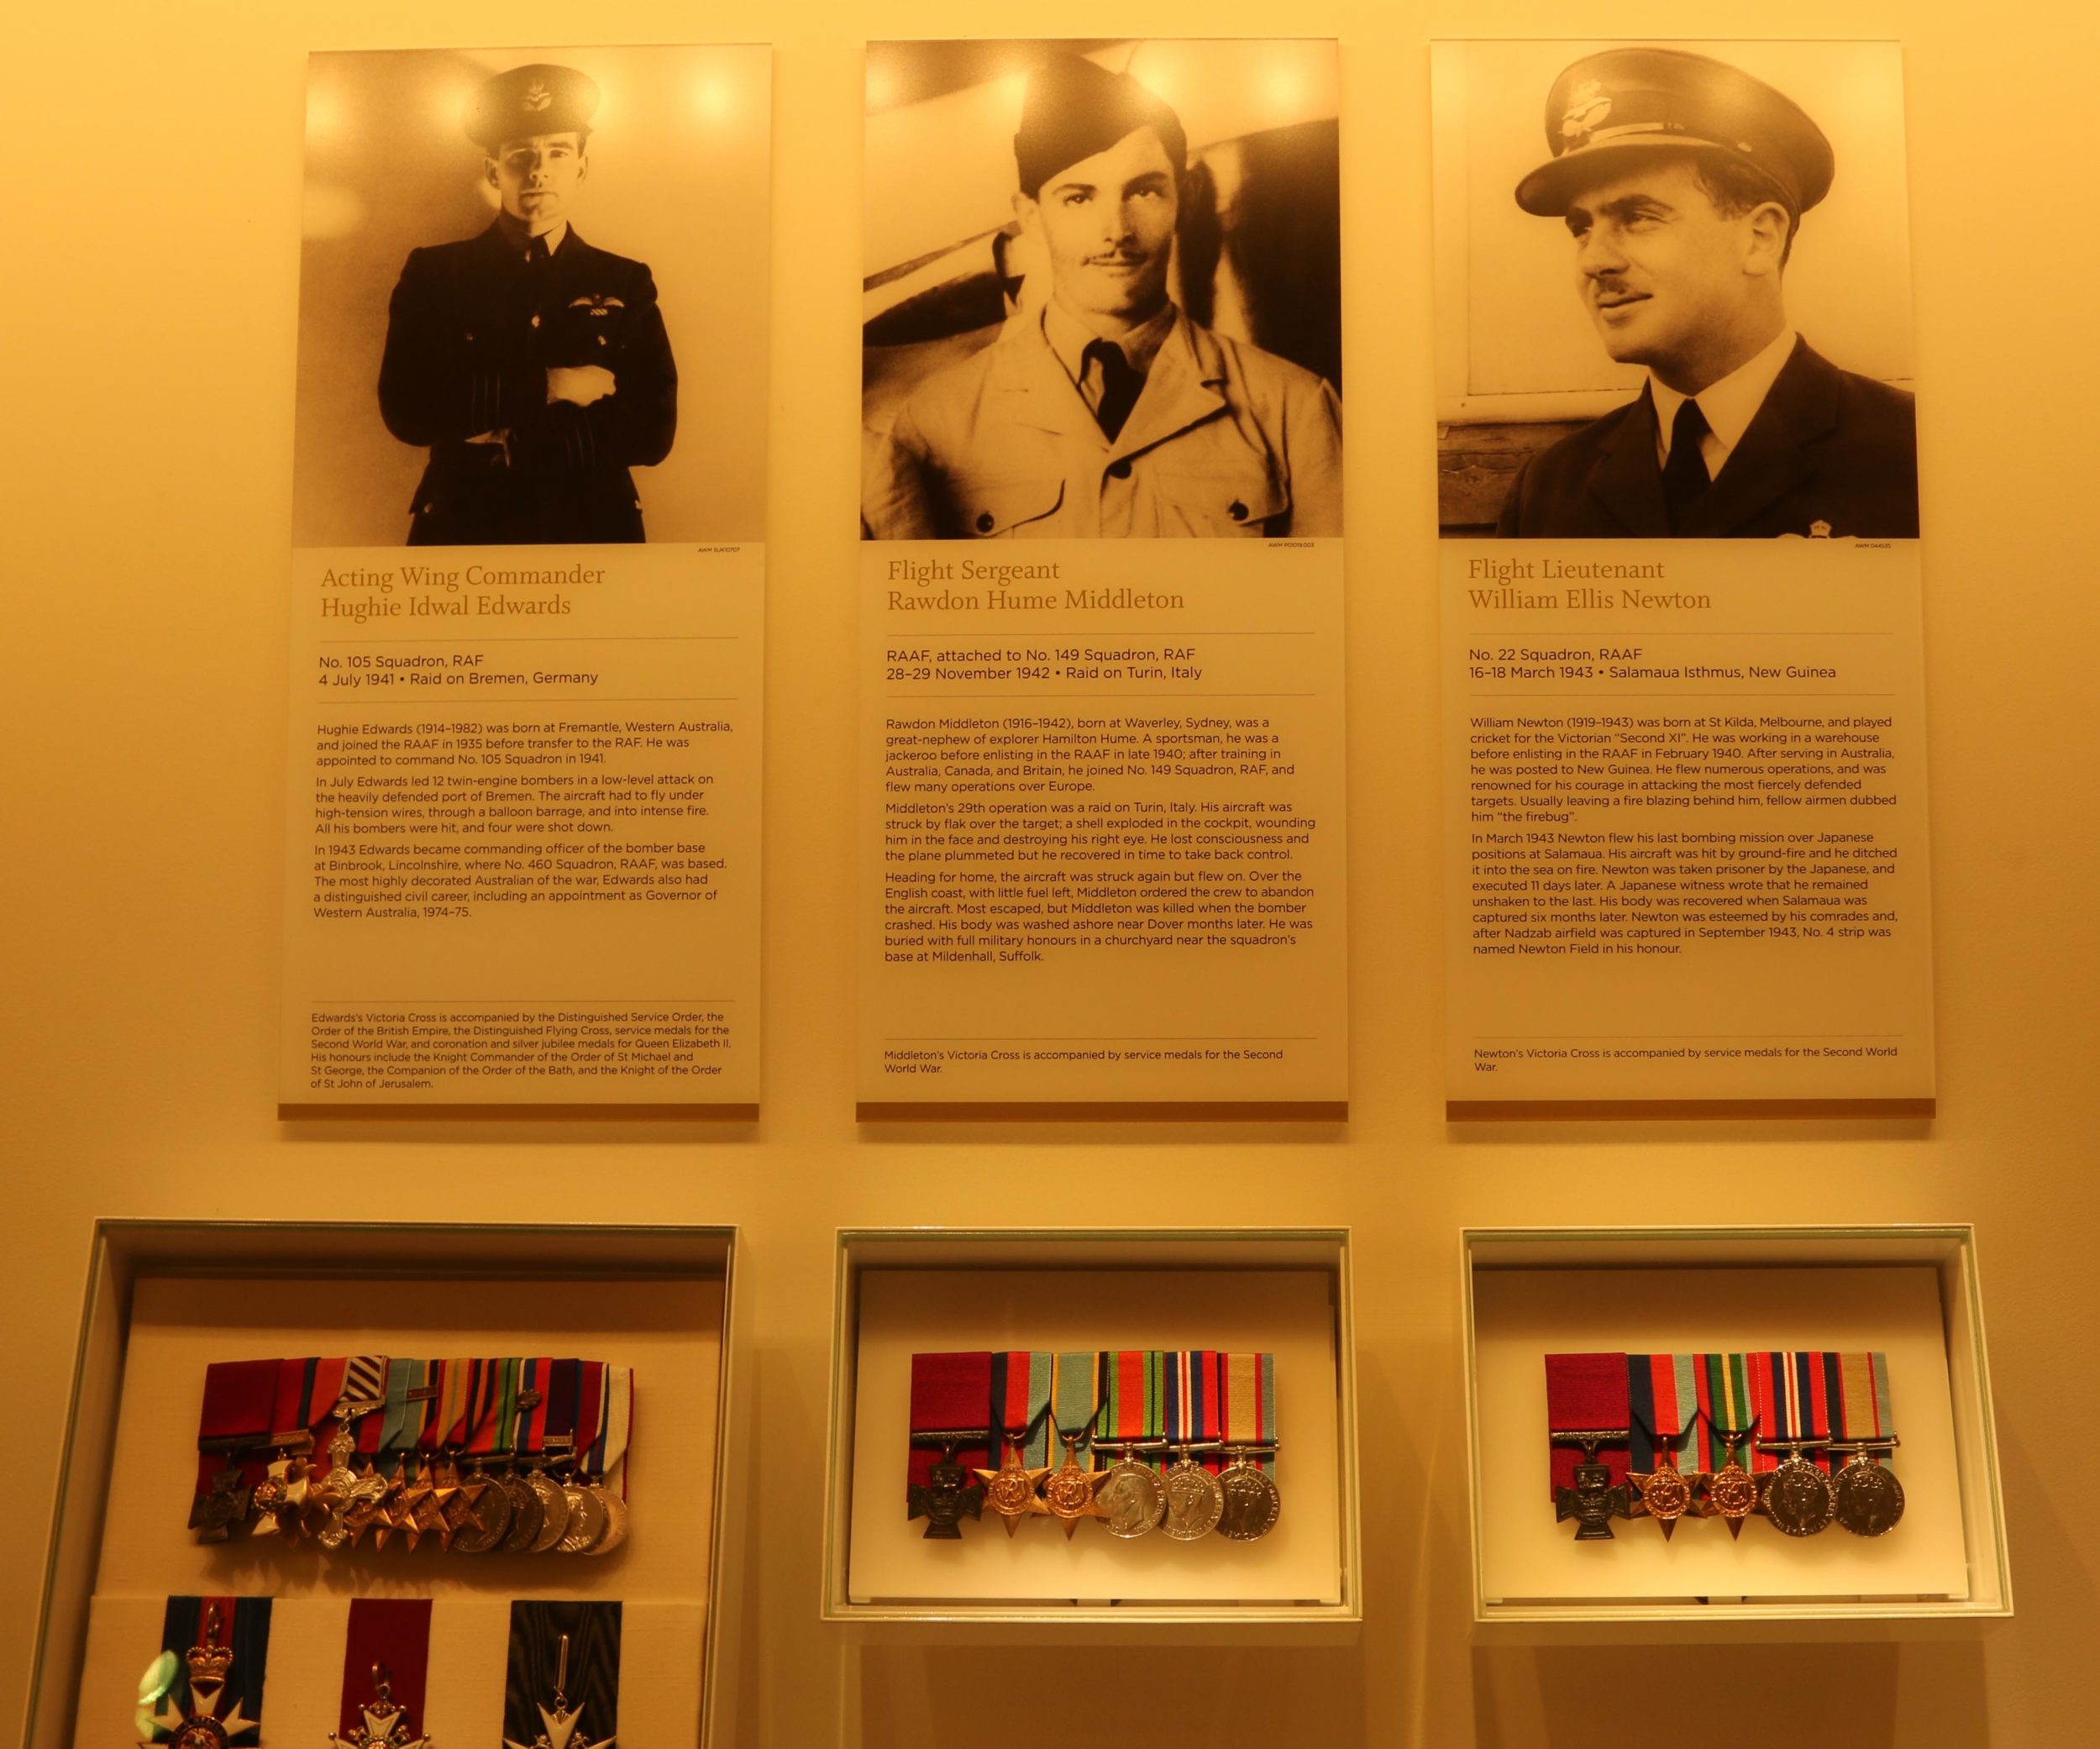 Hall of Valour at the Australian War Memorial in Canberra